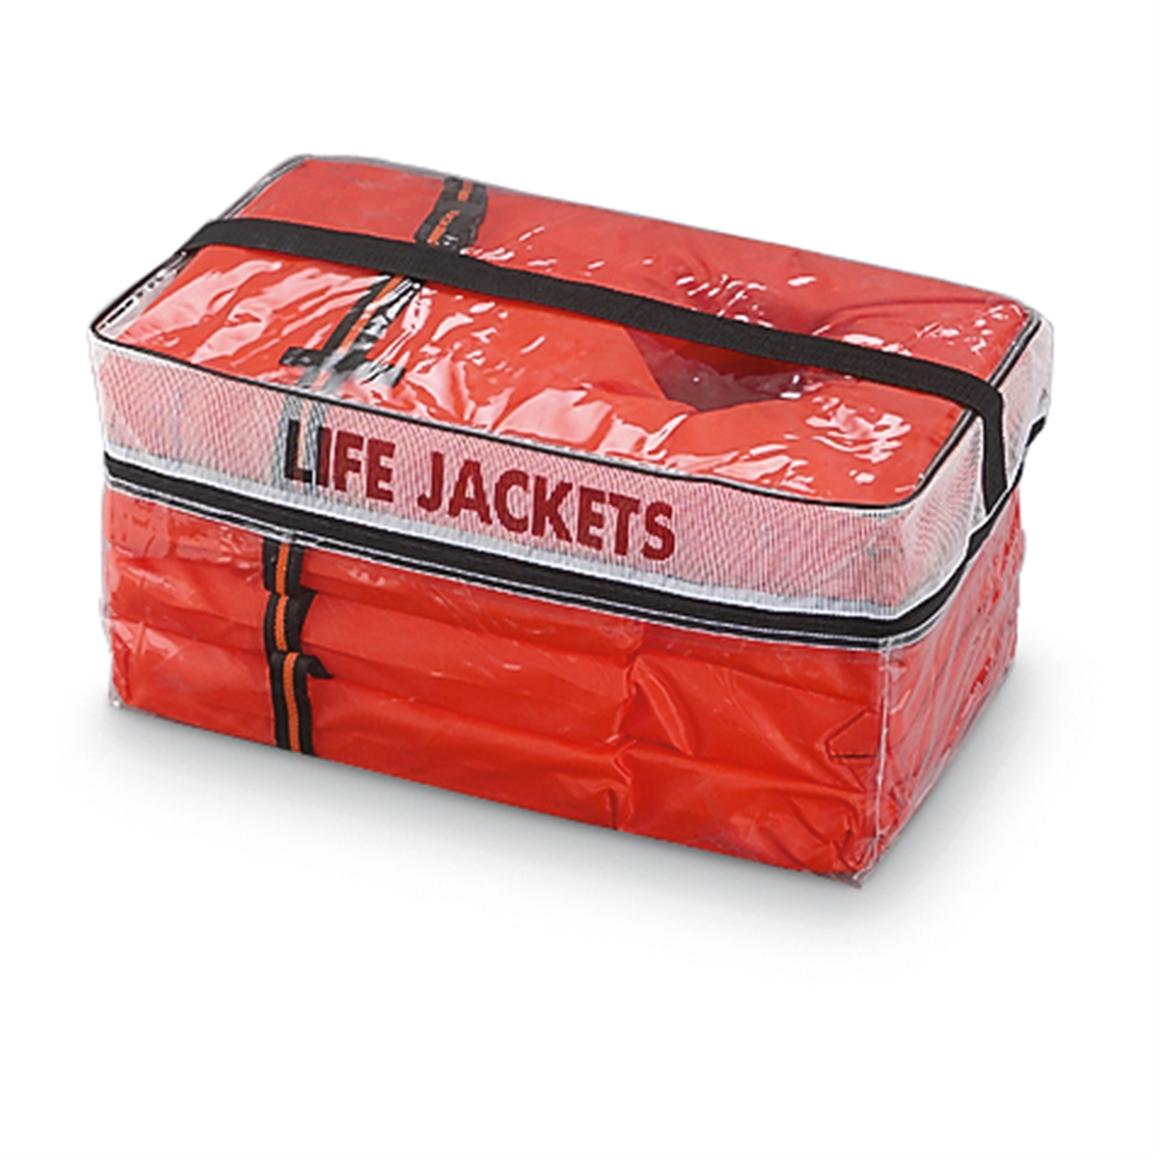 4 Type II Life Vests with Storage Bag - 180746, Universal Life Vests at Sportsman&#39;s Guide